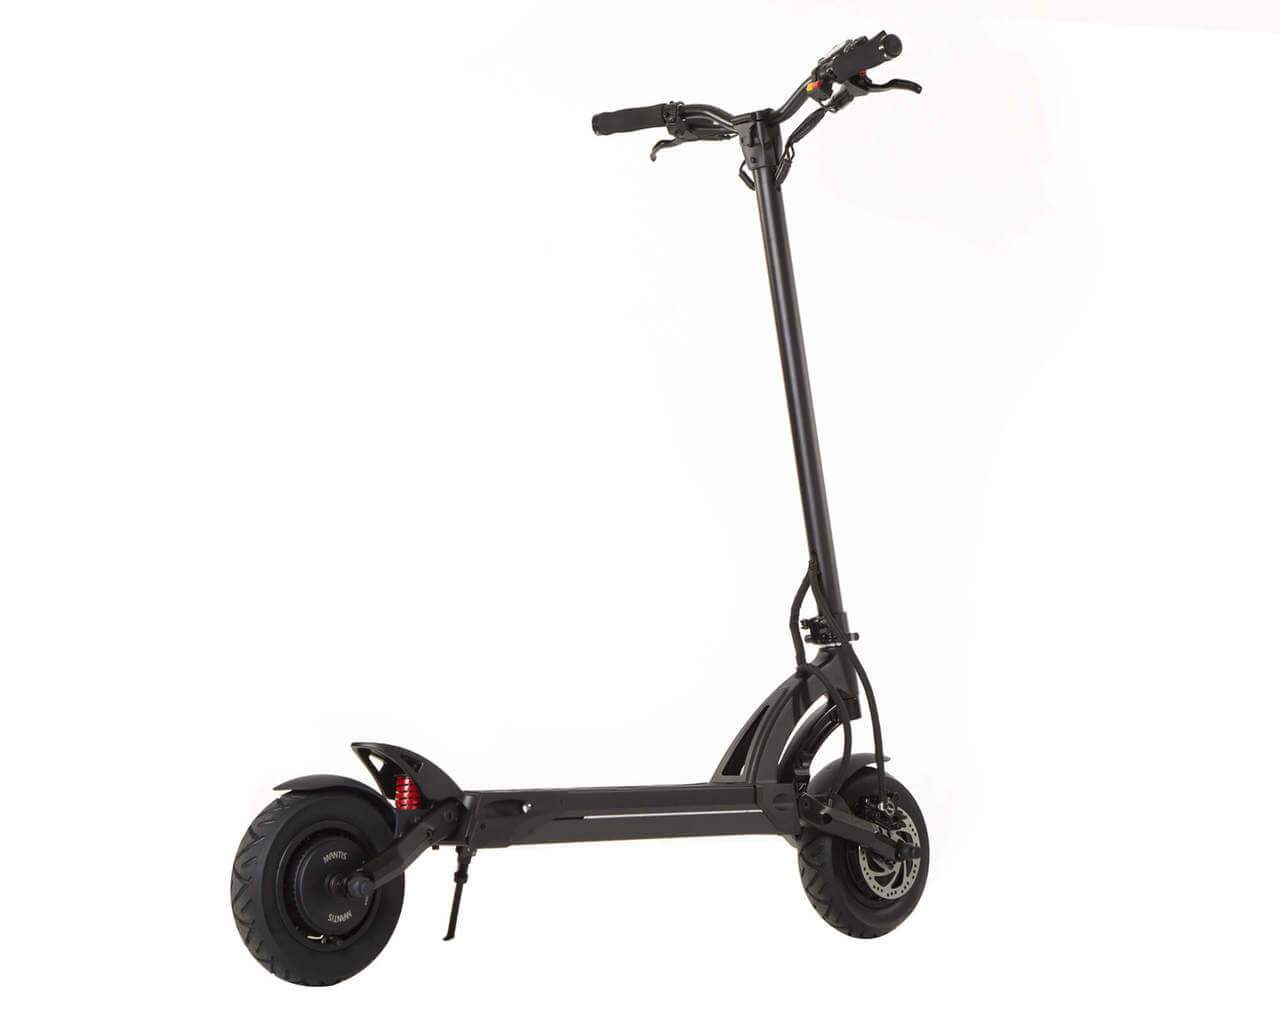 Kaabo Mantis 8 Dual Motor Electric Scooter